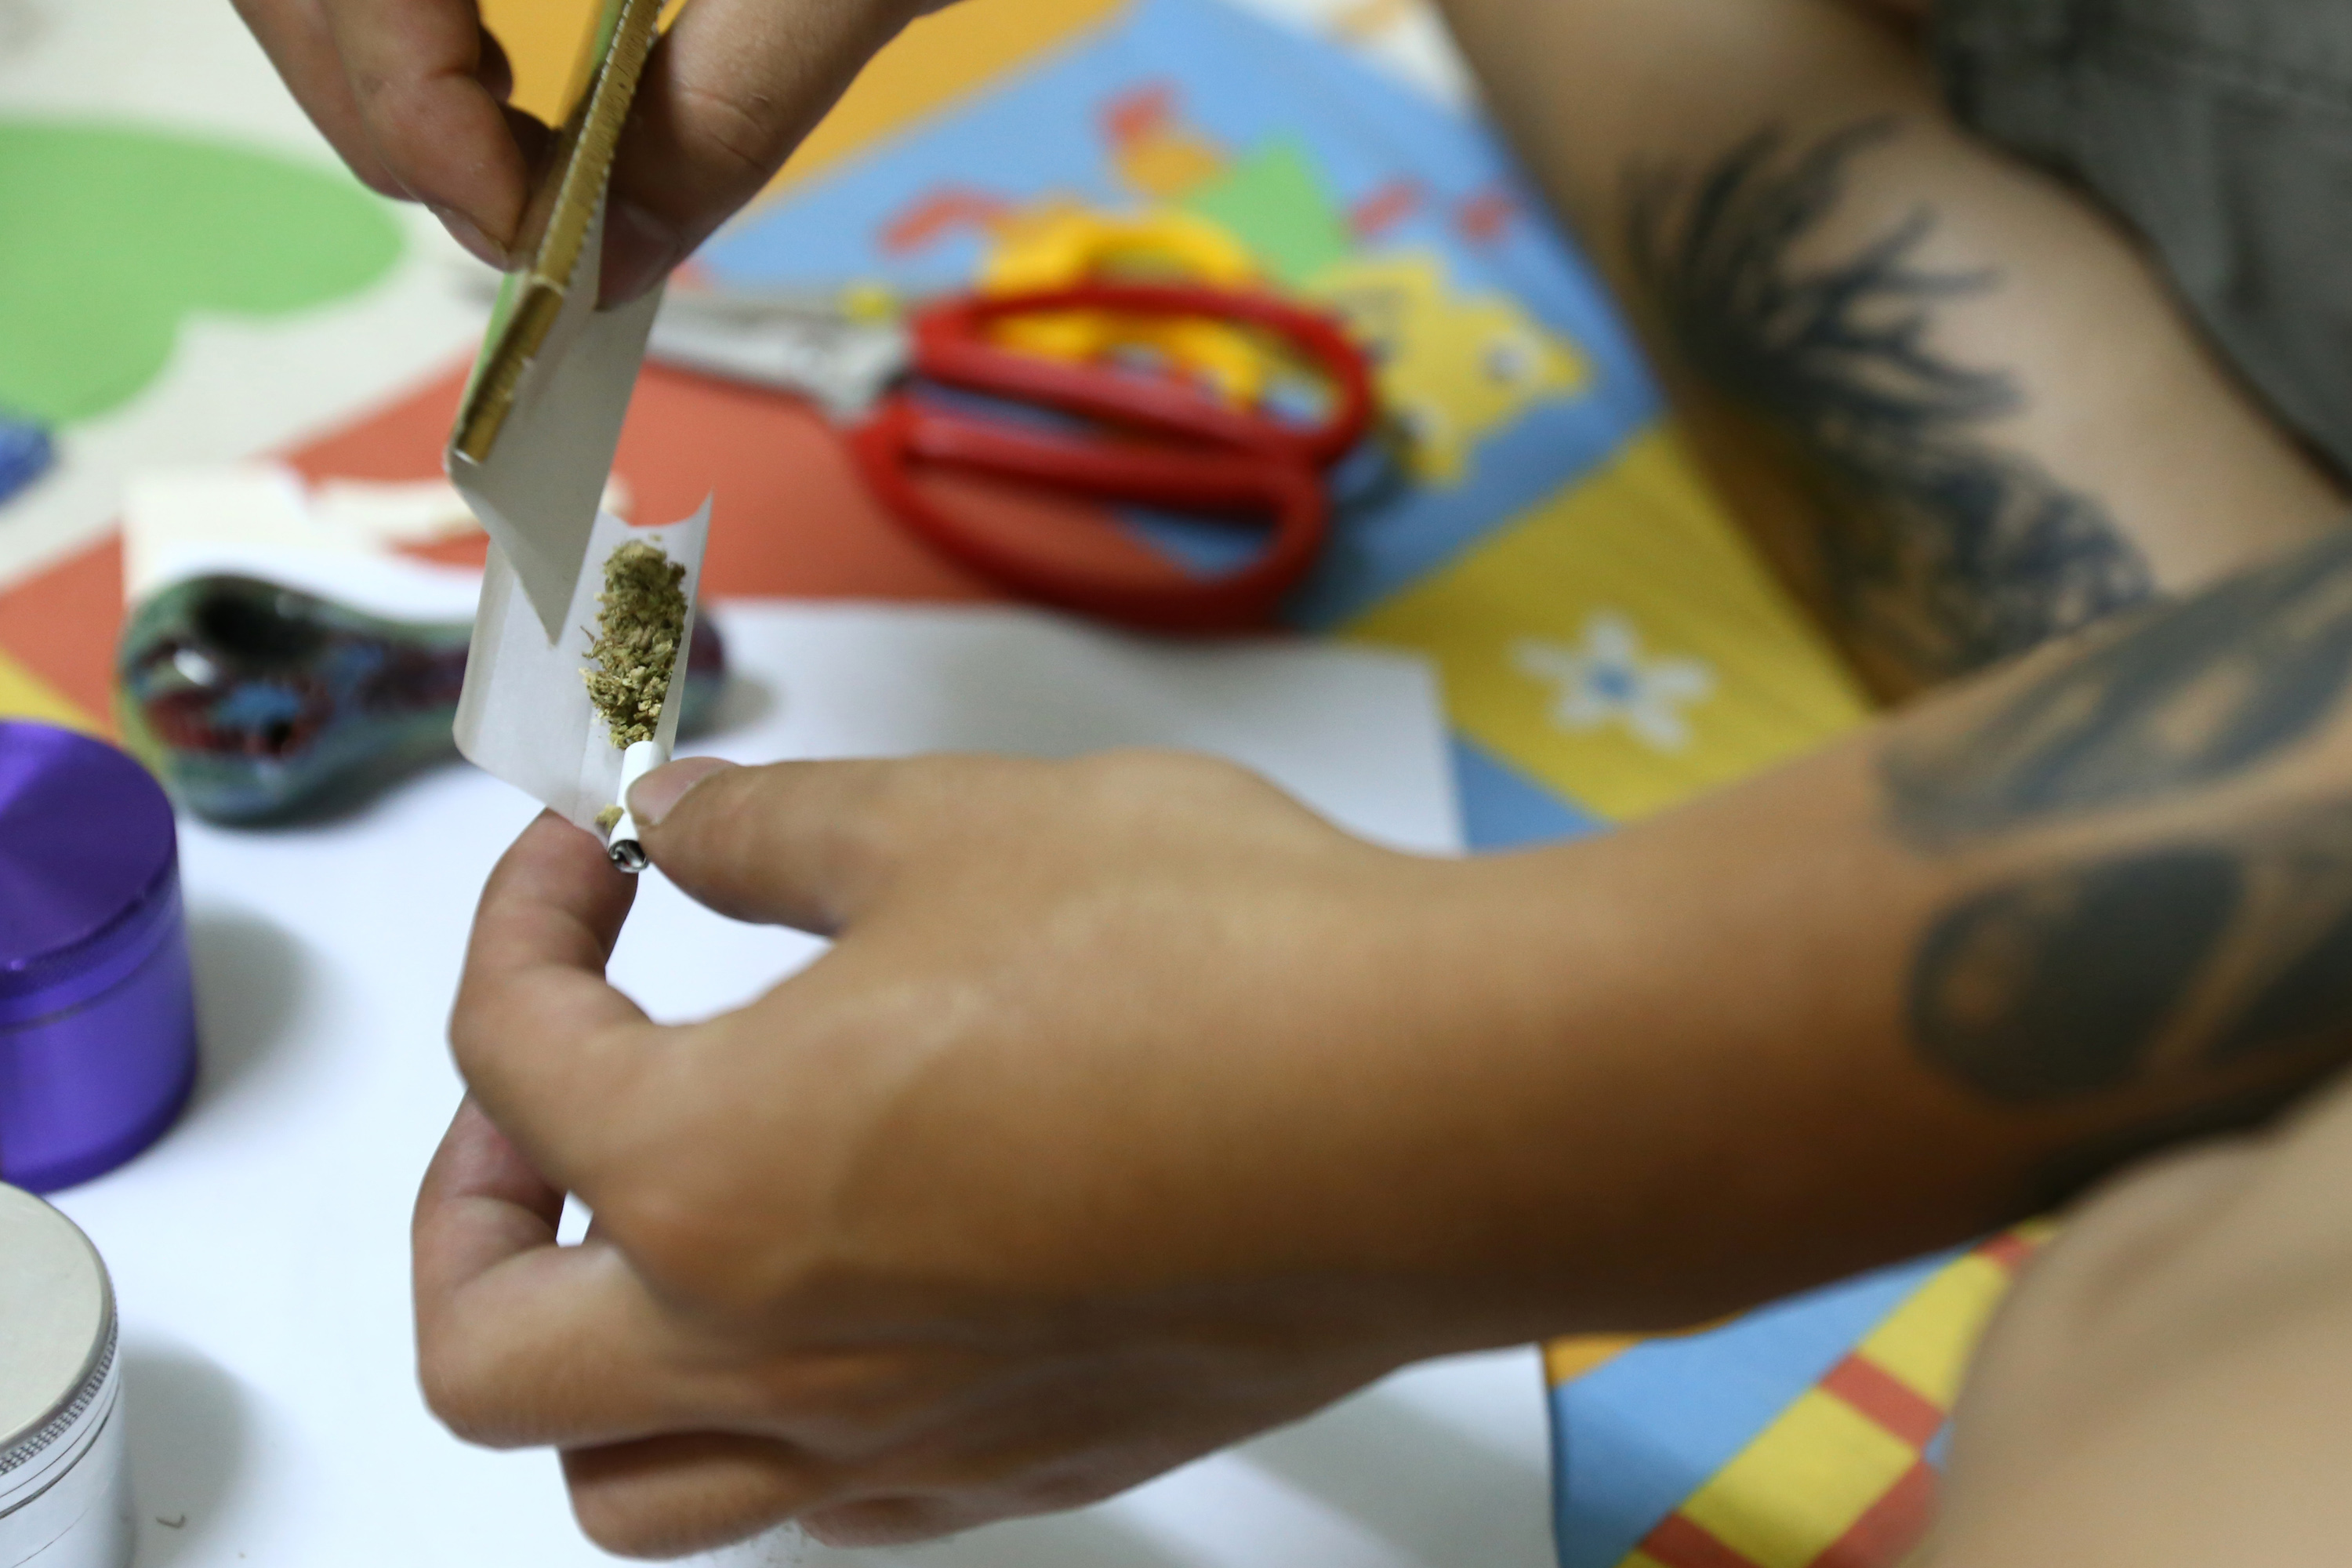 A man rolls a joint with Canadian-grown marijuana at his room in the old quarter area of Hanoi. Photo: AP